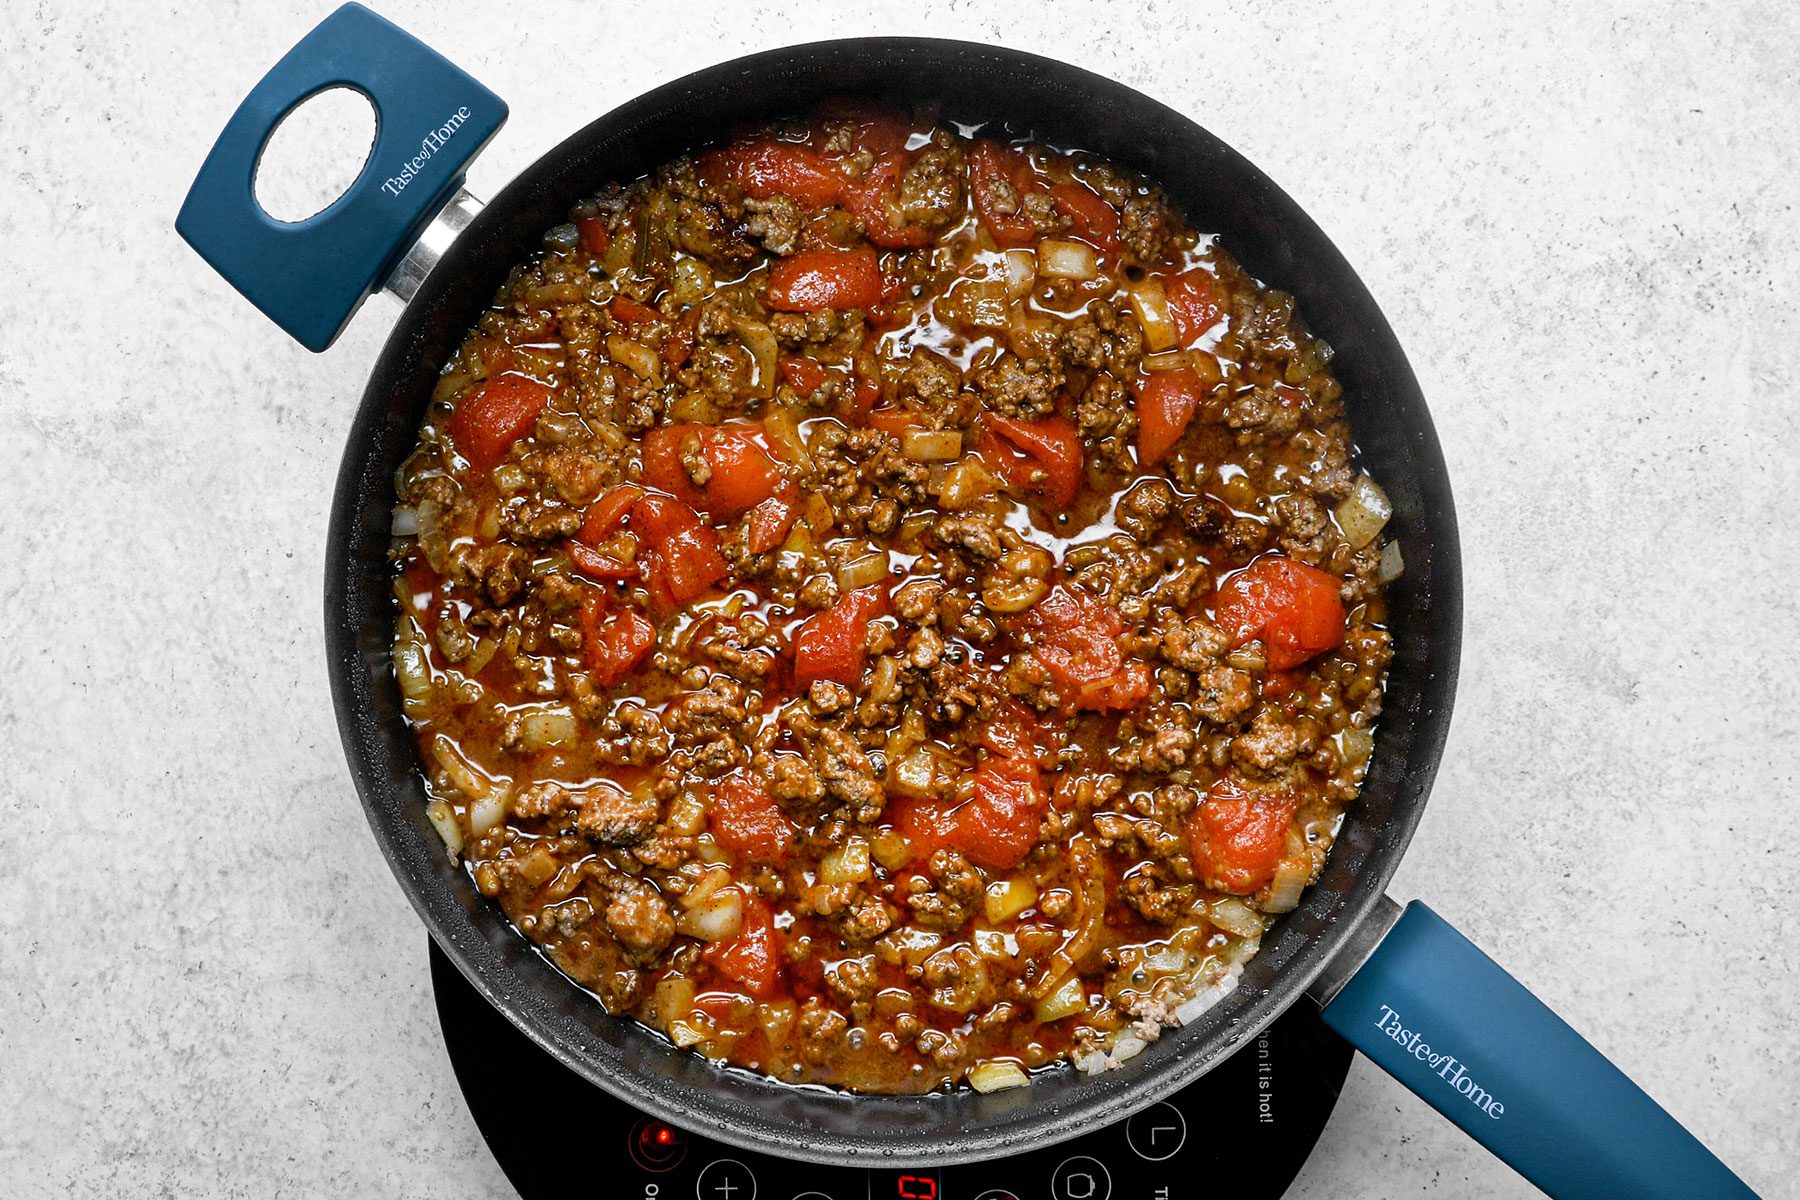 Spices added in Chopped onion and Beef mixture in a large skillet